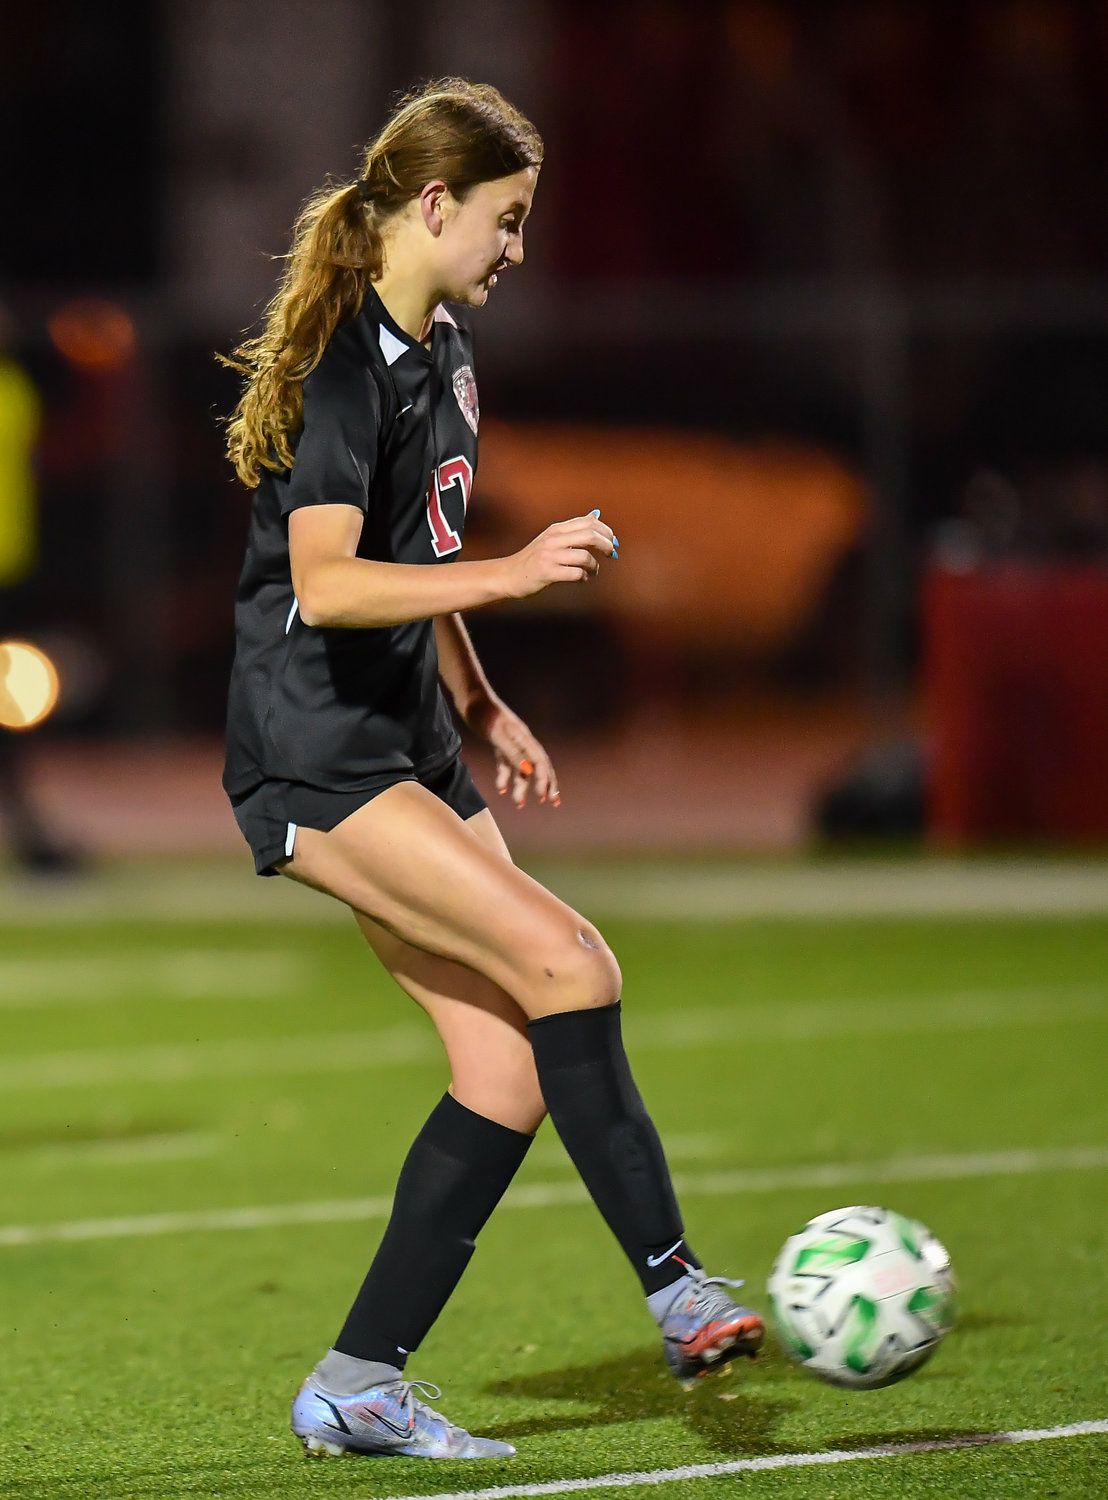 March 8, 2022: Katy's Kailey Adams #17 delivers the pass during the Katy vs Katy Taylor soccer match at KHS. (Photo by Mark Goodman / Katy Times)